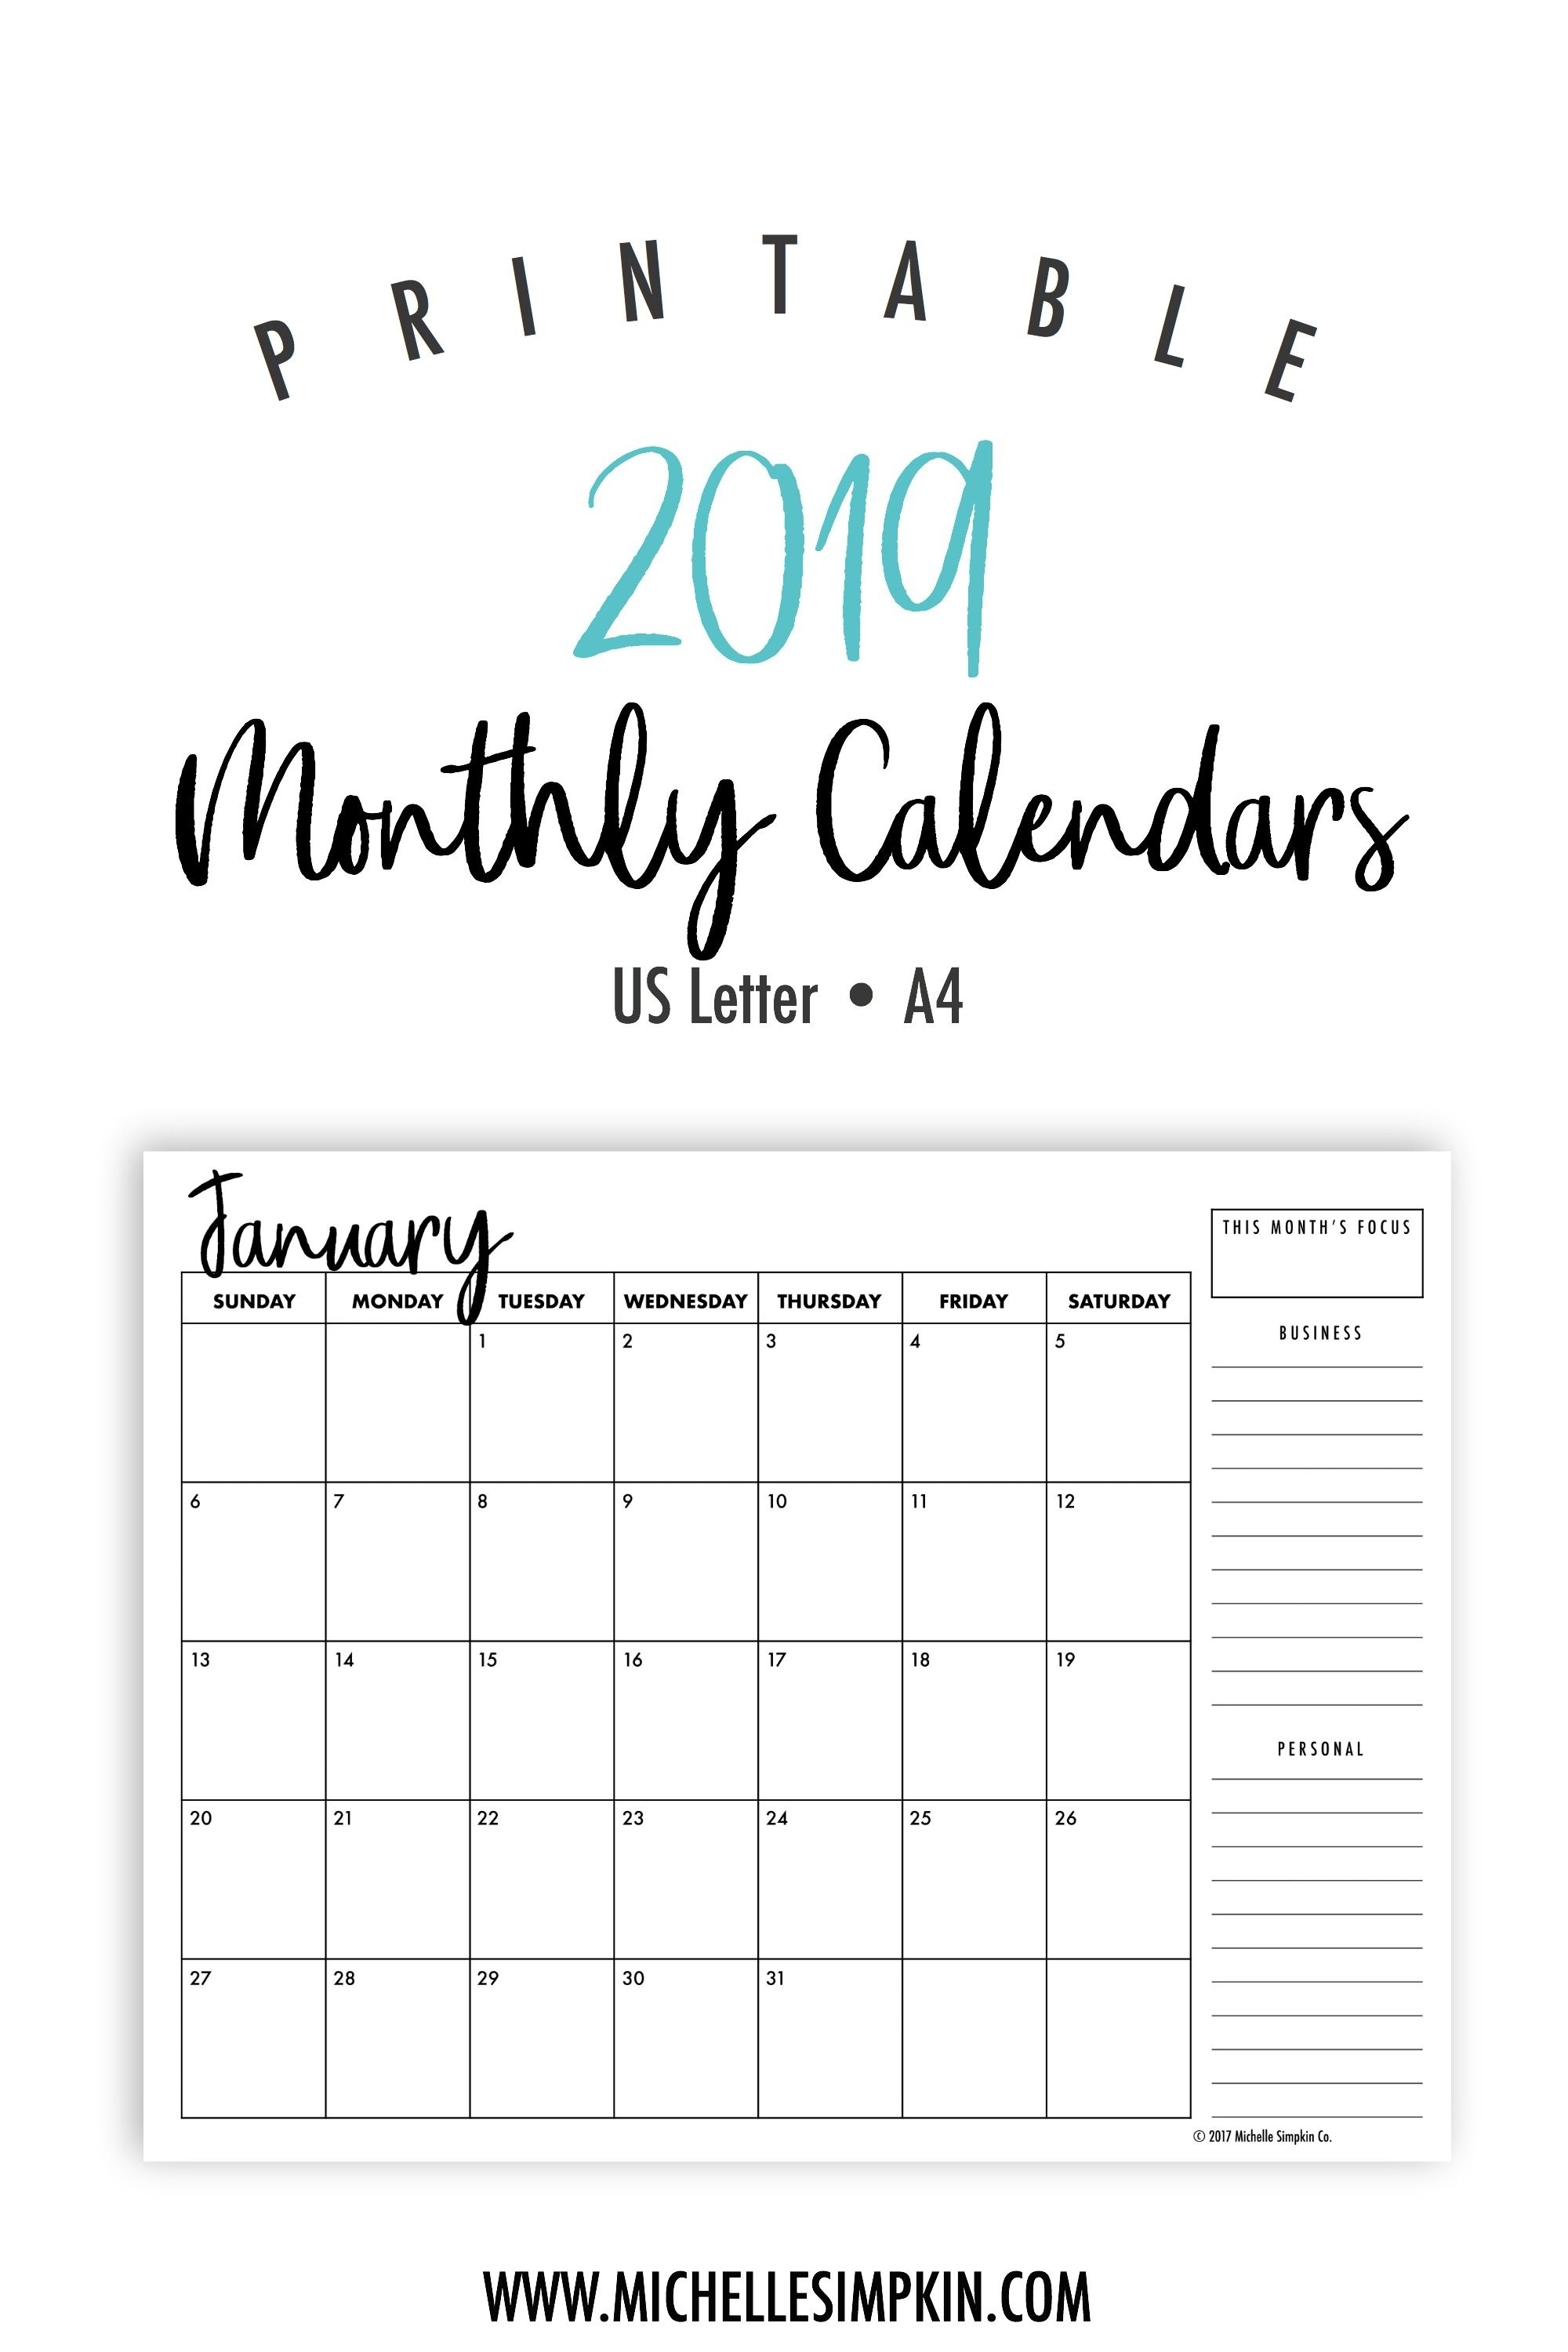 2019 Printable Monthly Calendars • Landscape • Us Letter • A4 with Calendar Prints Related To Beauty Of Water